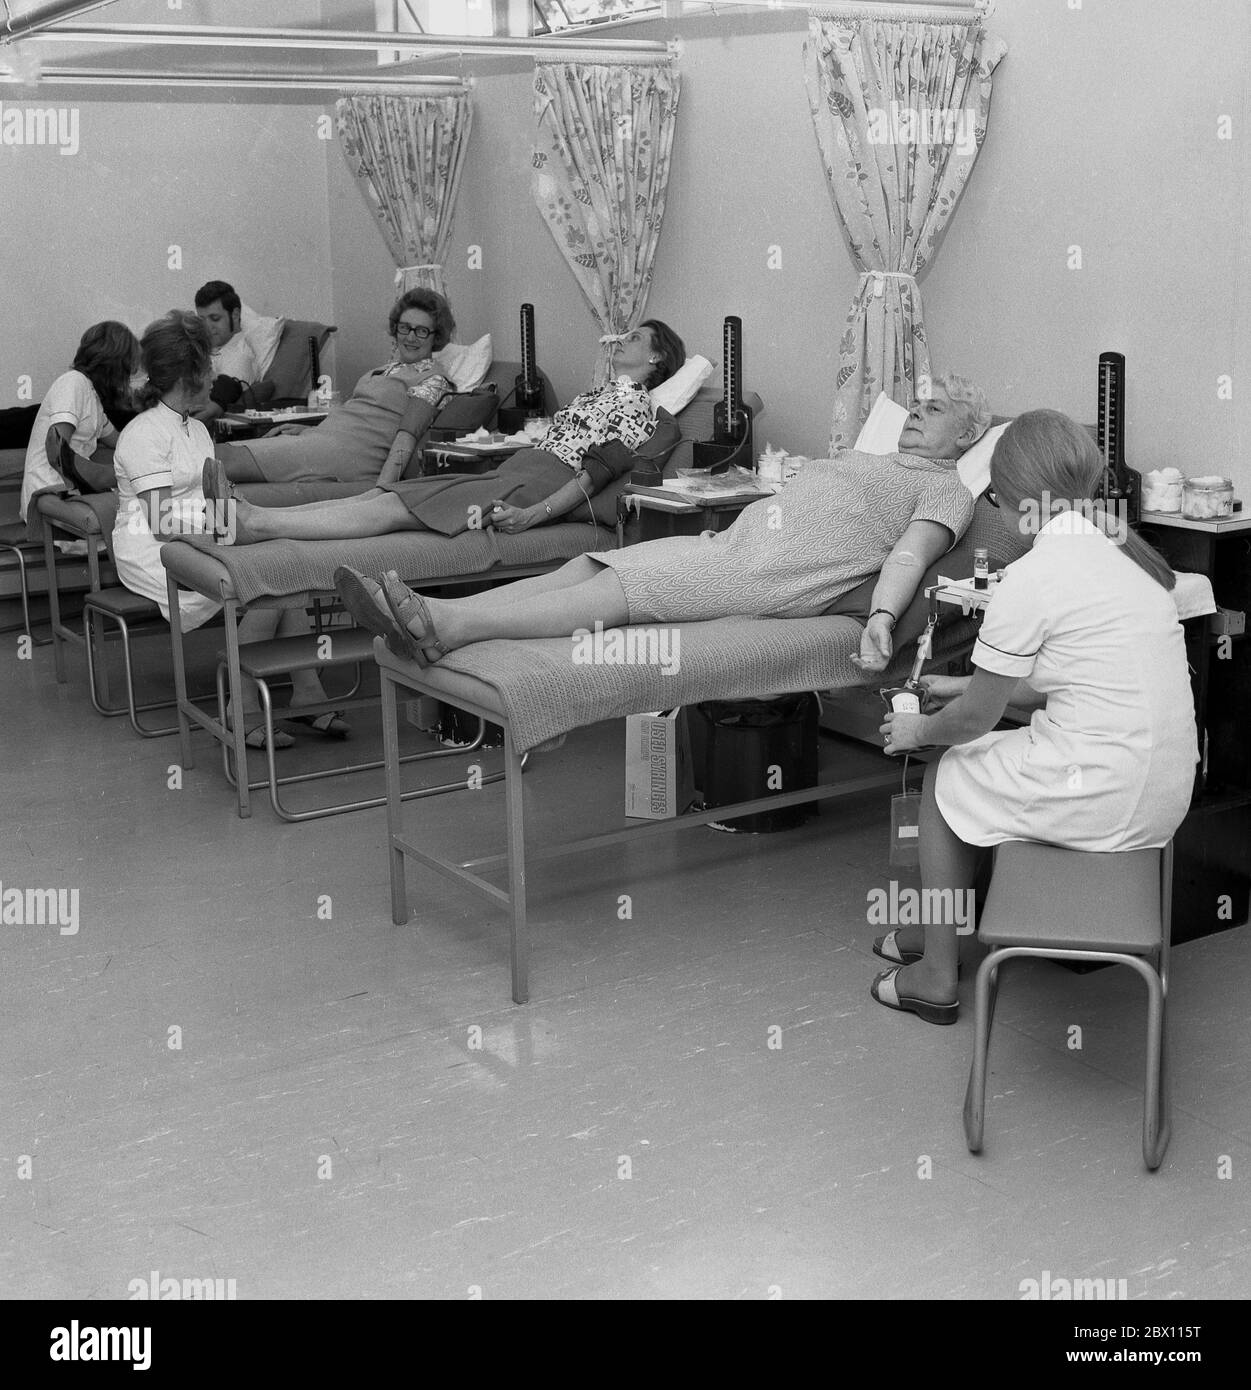 'Blood donors', members of the public lying on surgical beds in a medical or health centre voluntarily giving blood, Lewisham, South London, late 60s, early 1970s. Giving blood for community supply is public-spirited act by people as blood can save lives. Stock Photo